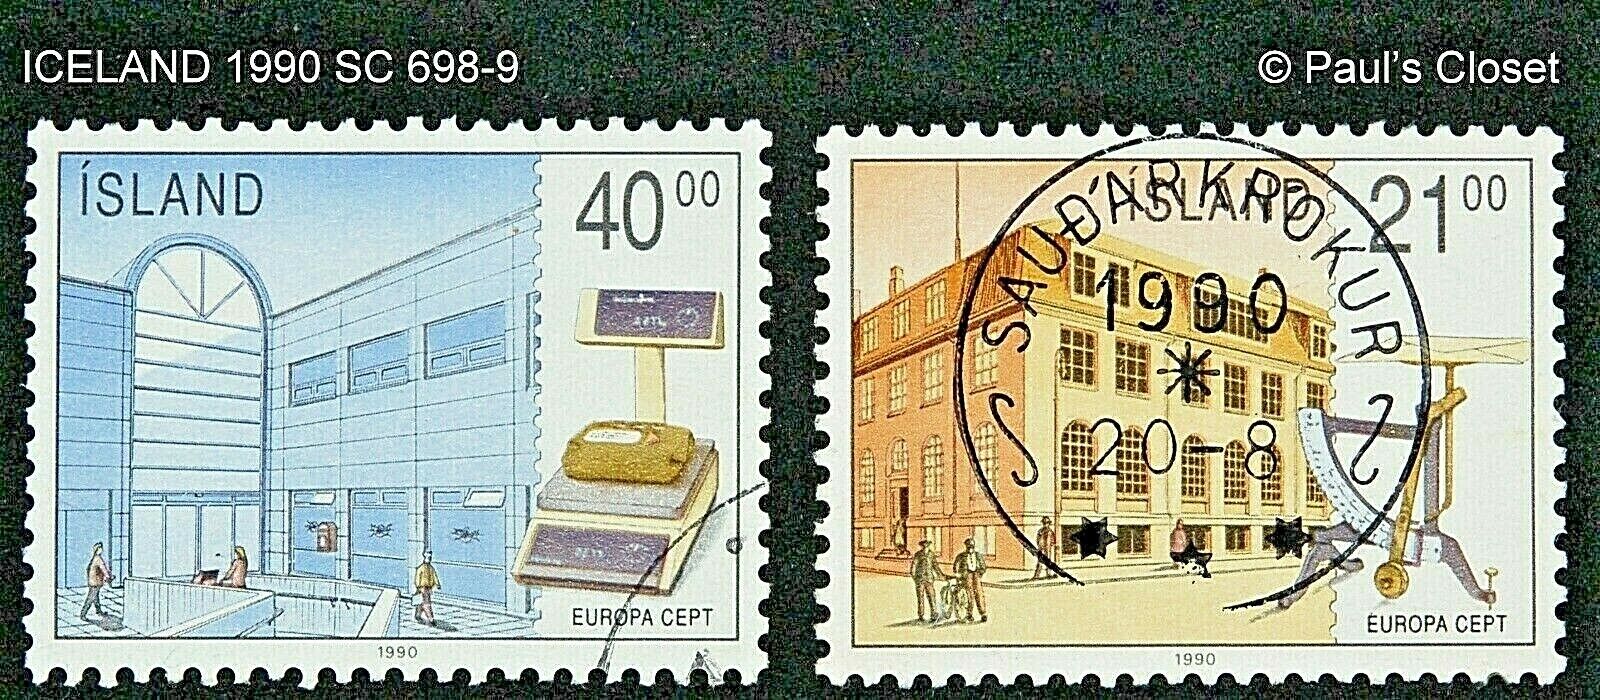 ICELAND 1990 SC 698-9 NEW EUROPA OLD/NEW POST OFFICES 21k/40k UNG VERY FINE  Без бренда